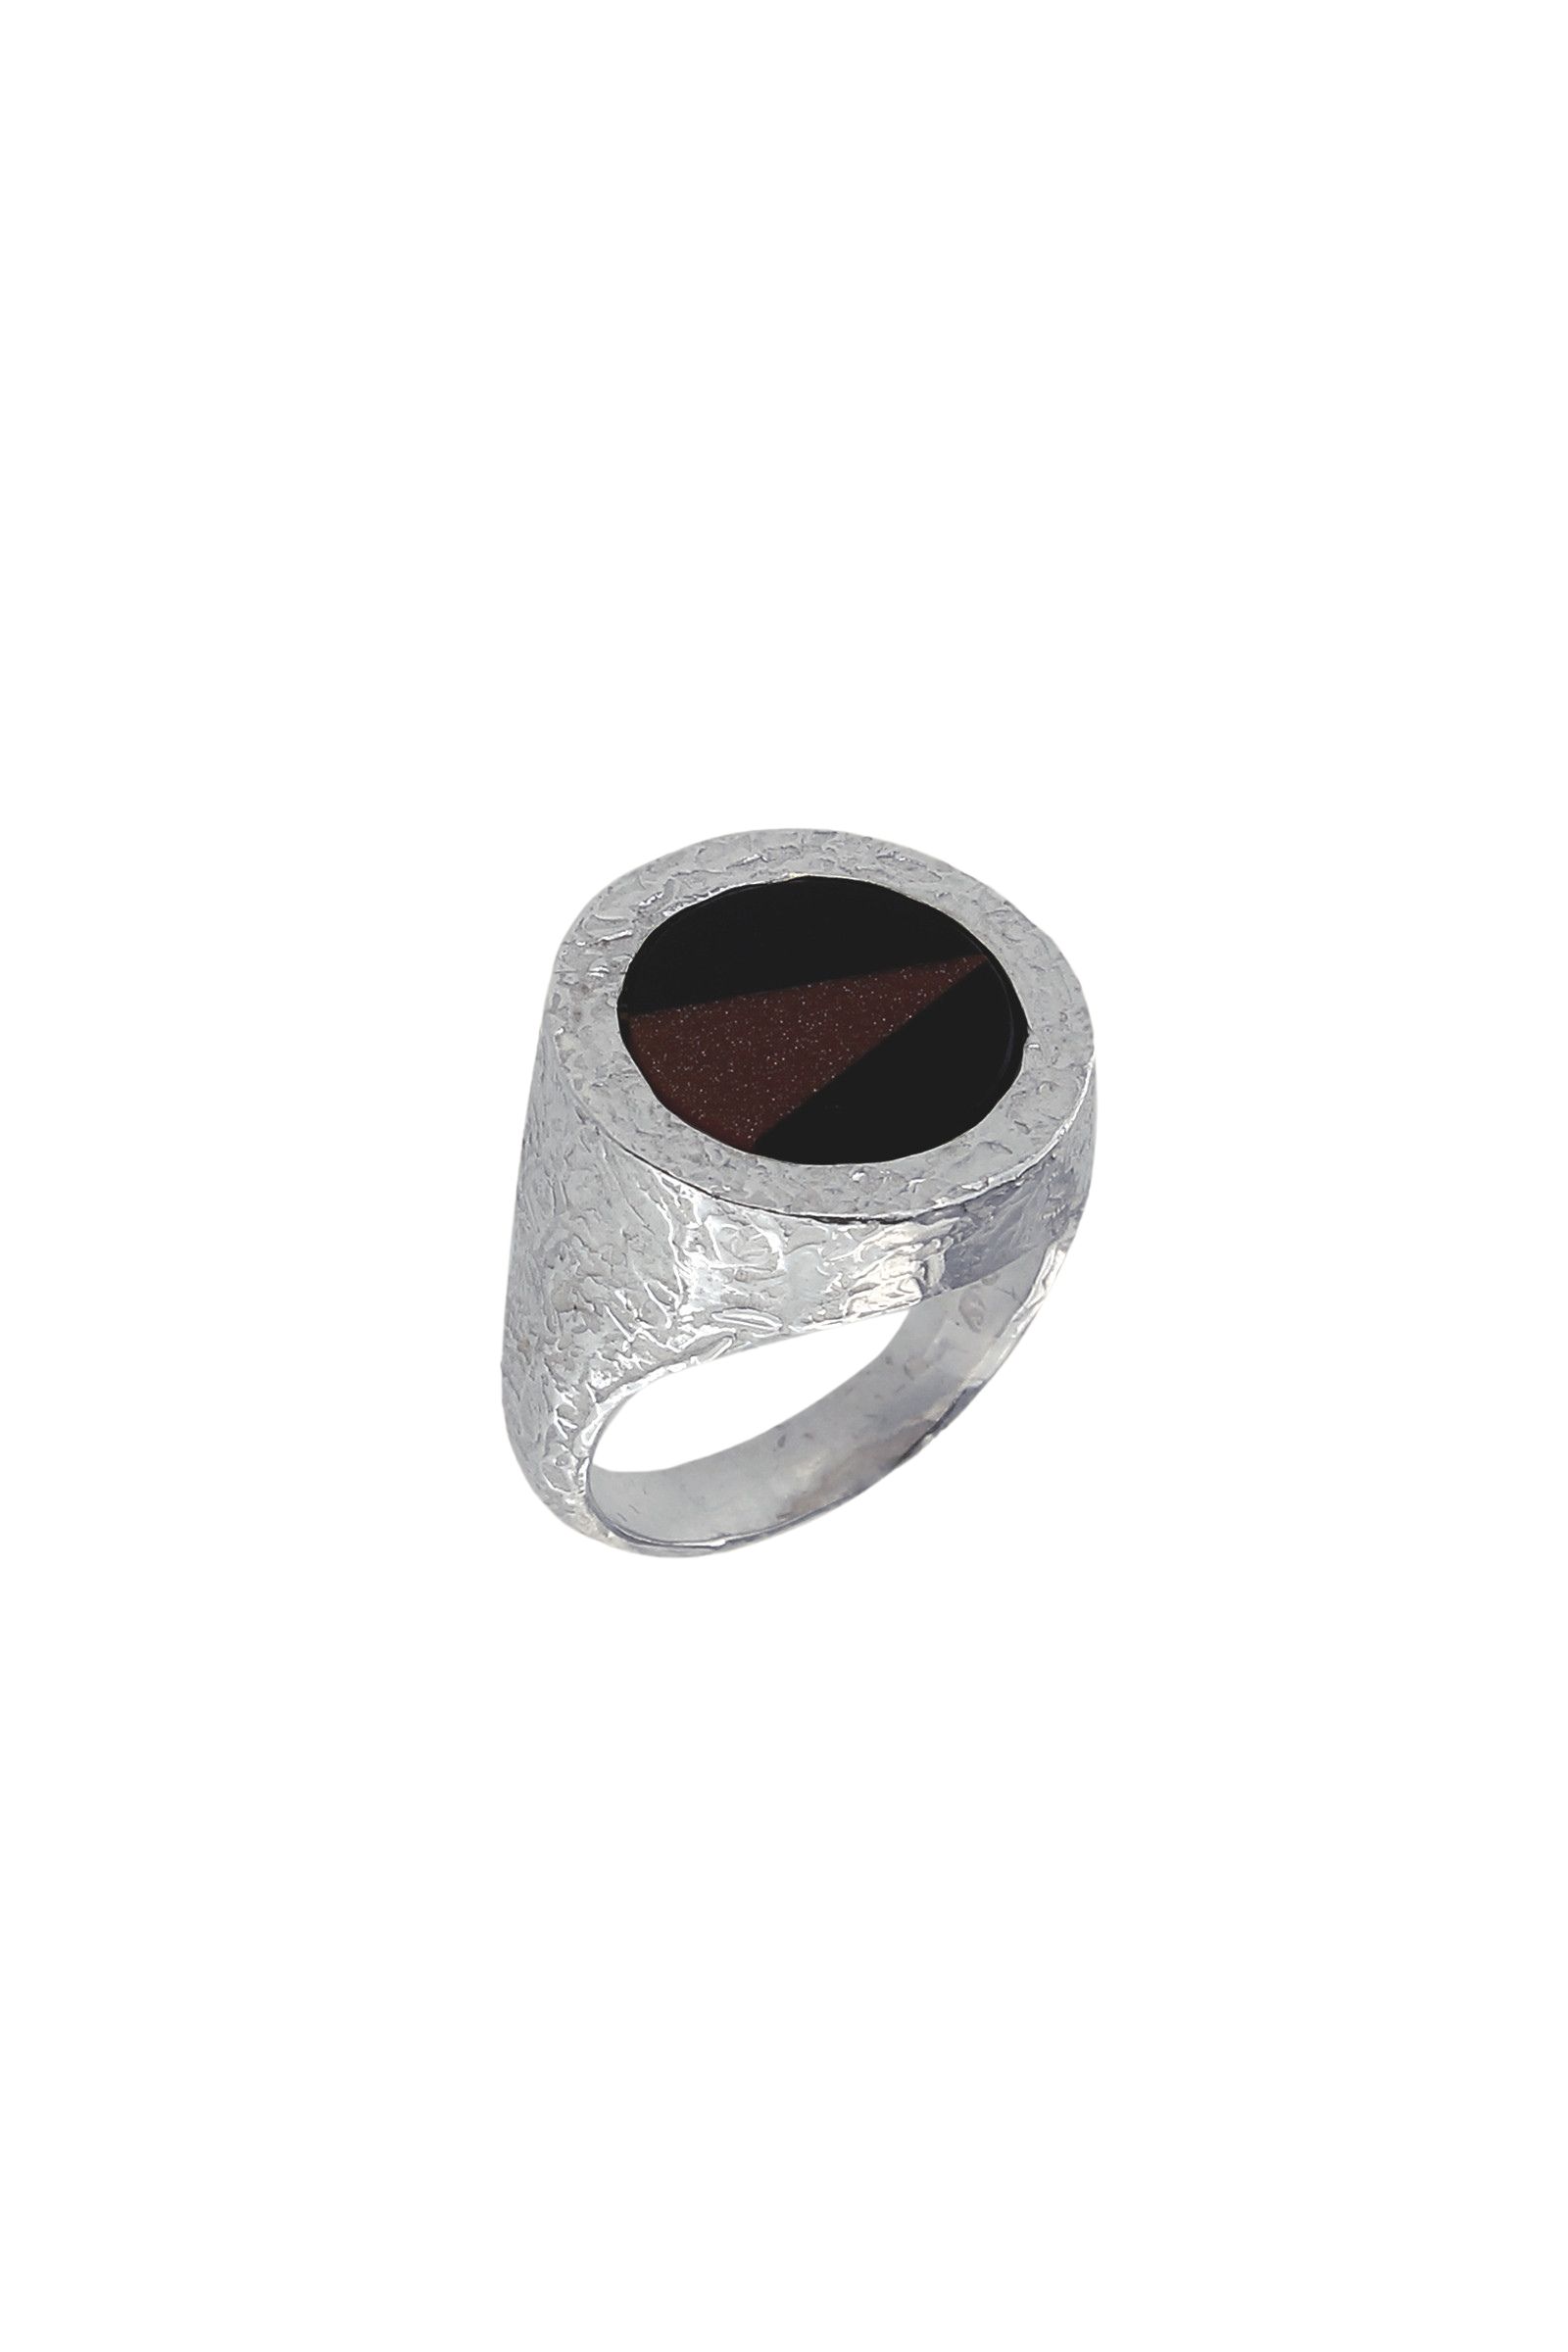 AE651-Bicolor-Sterling-Silver-925-Signet-Ring-1_